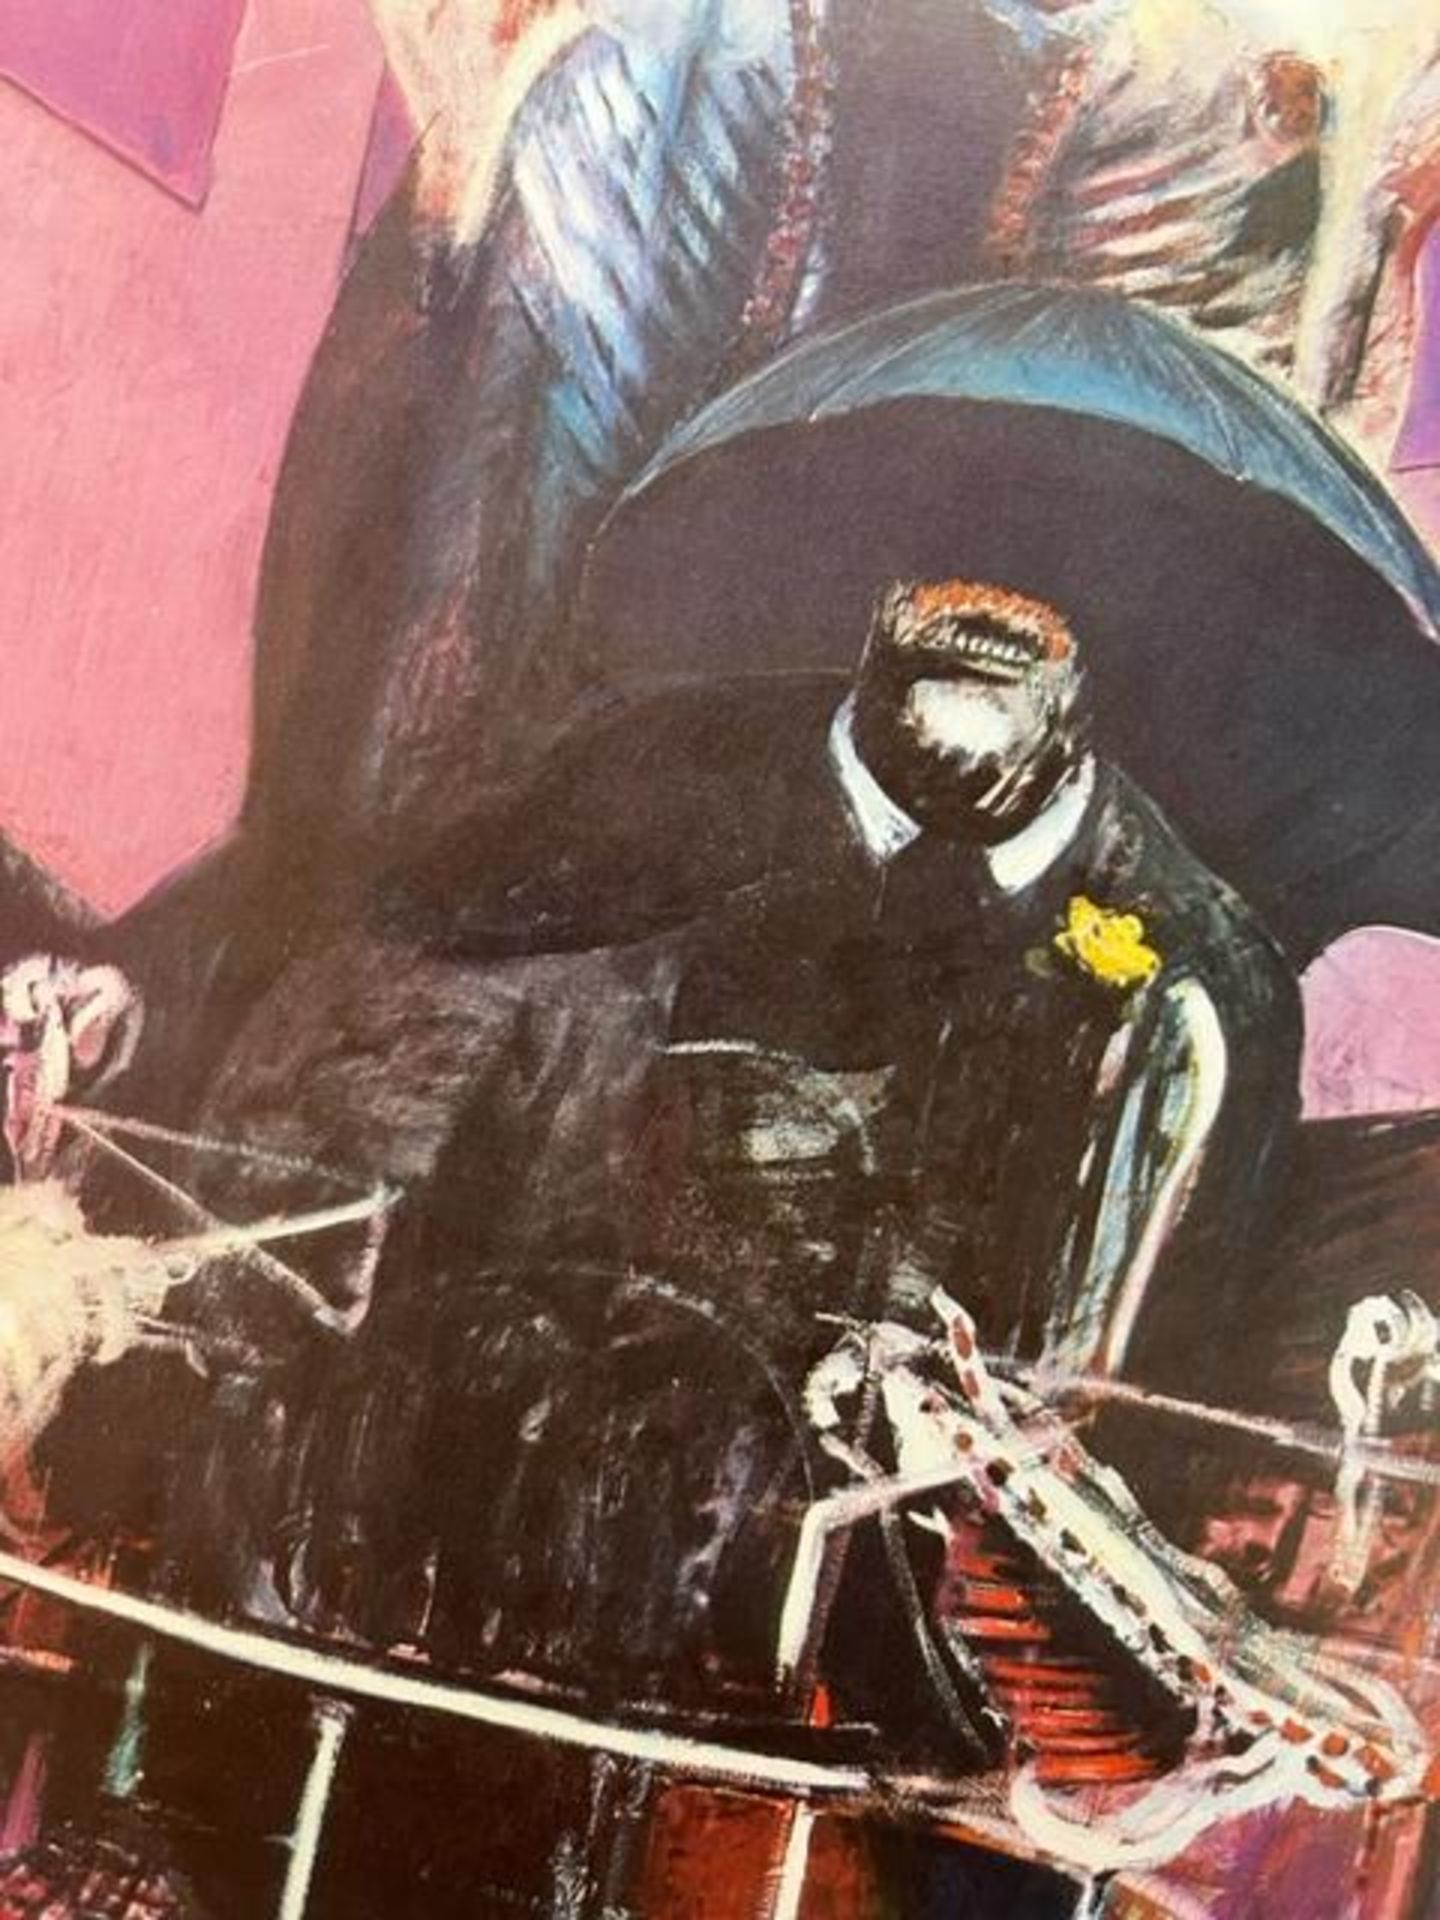 Francis Bacon "Painting" Print. - Image 12 of 12